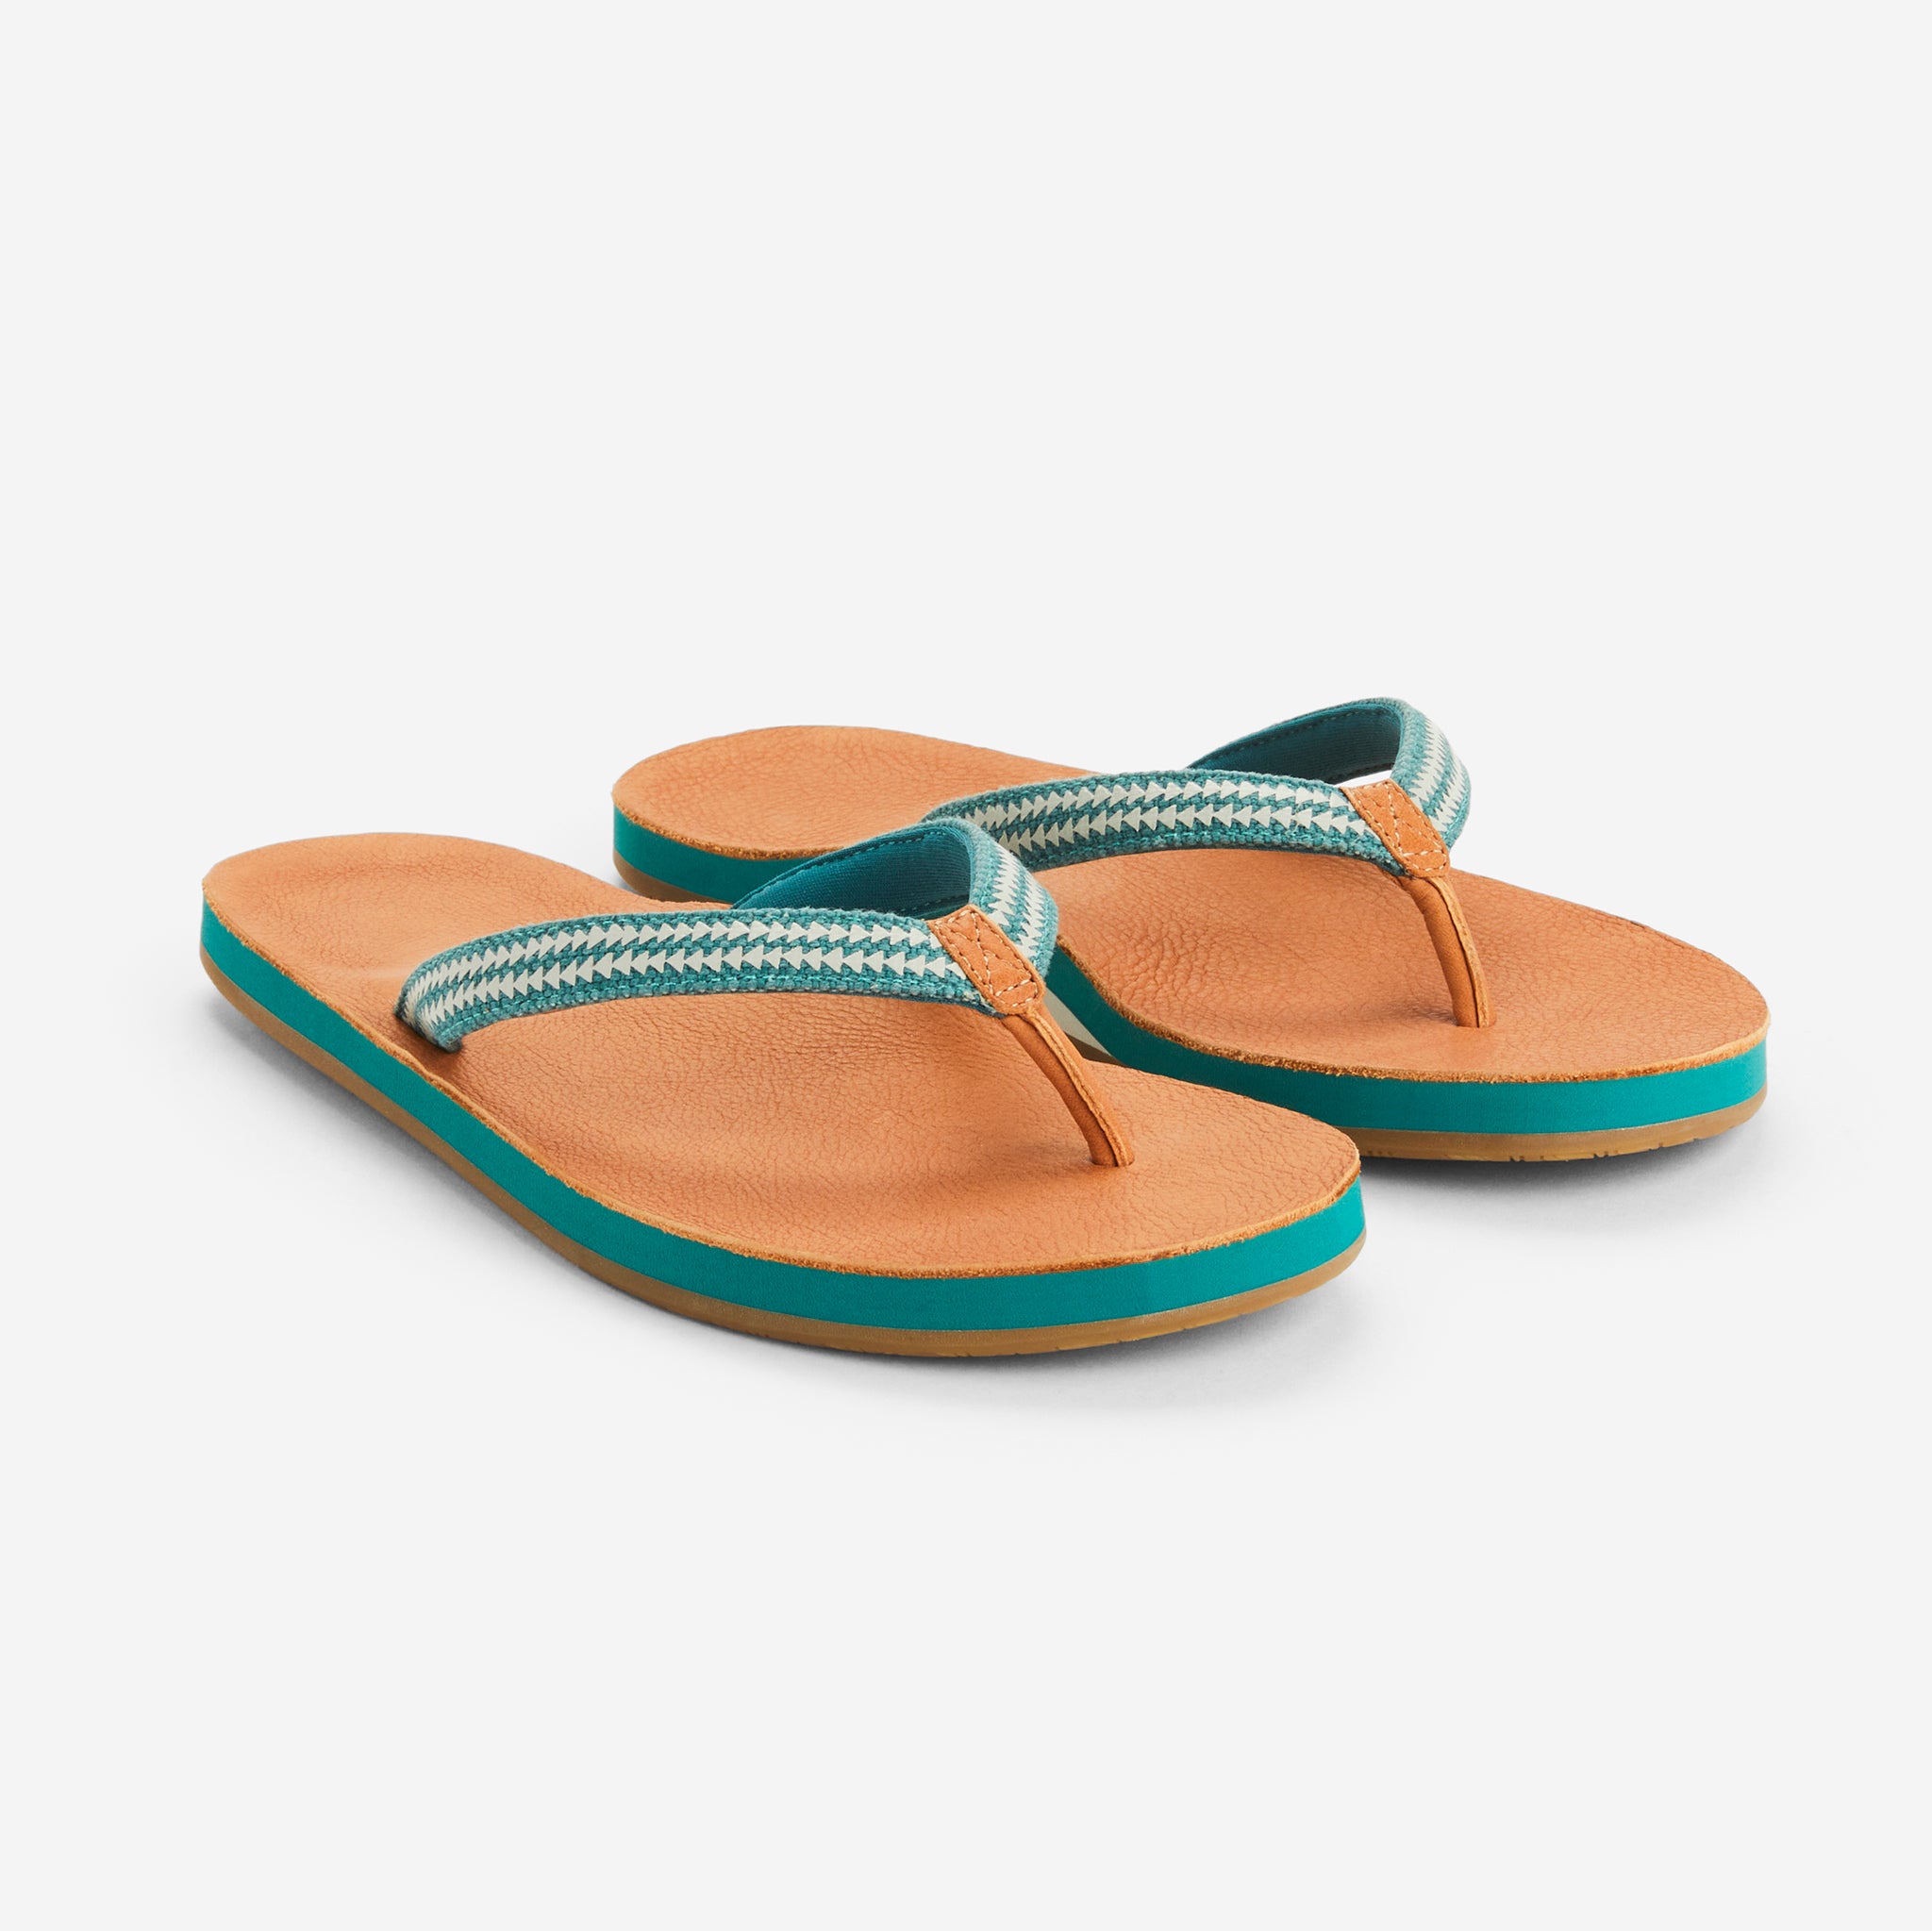 tan and green leather flip flops for women from Hari Mari